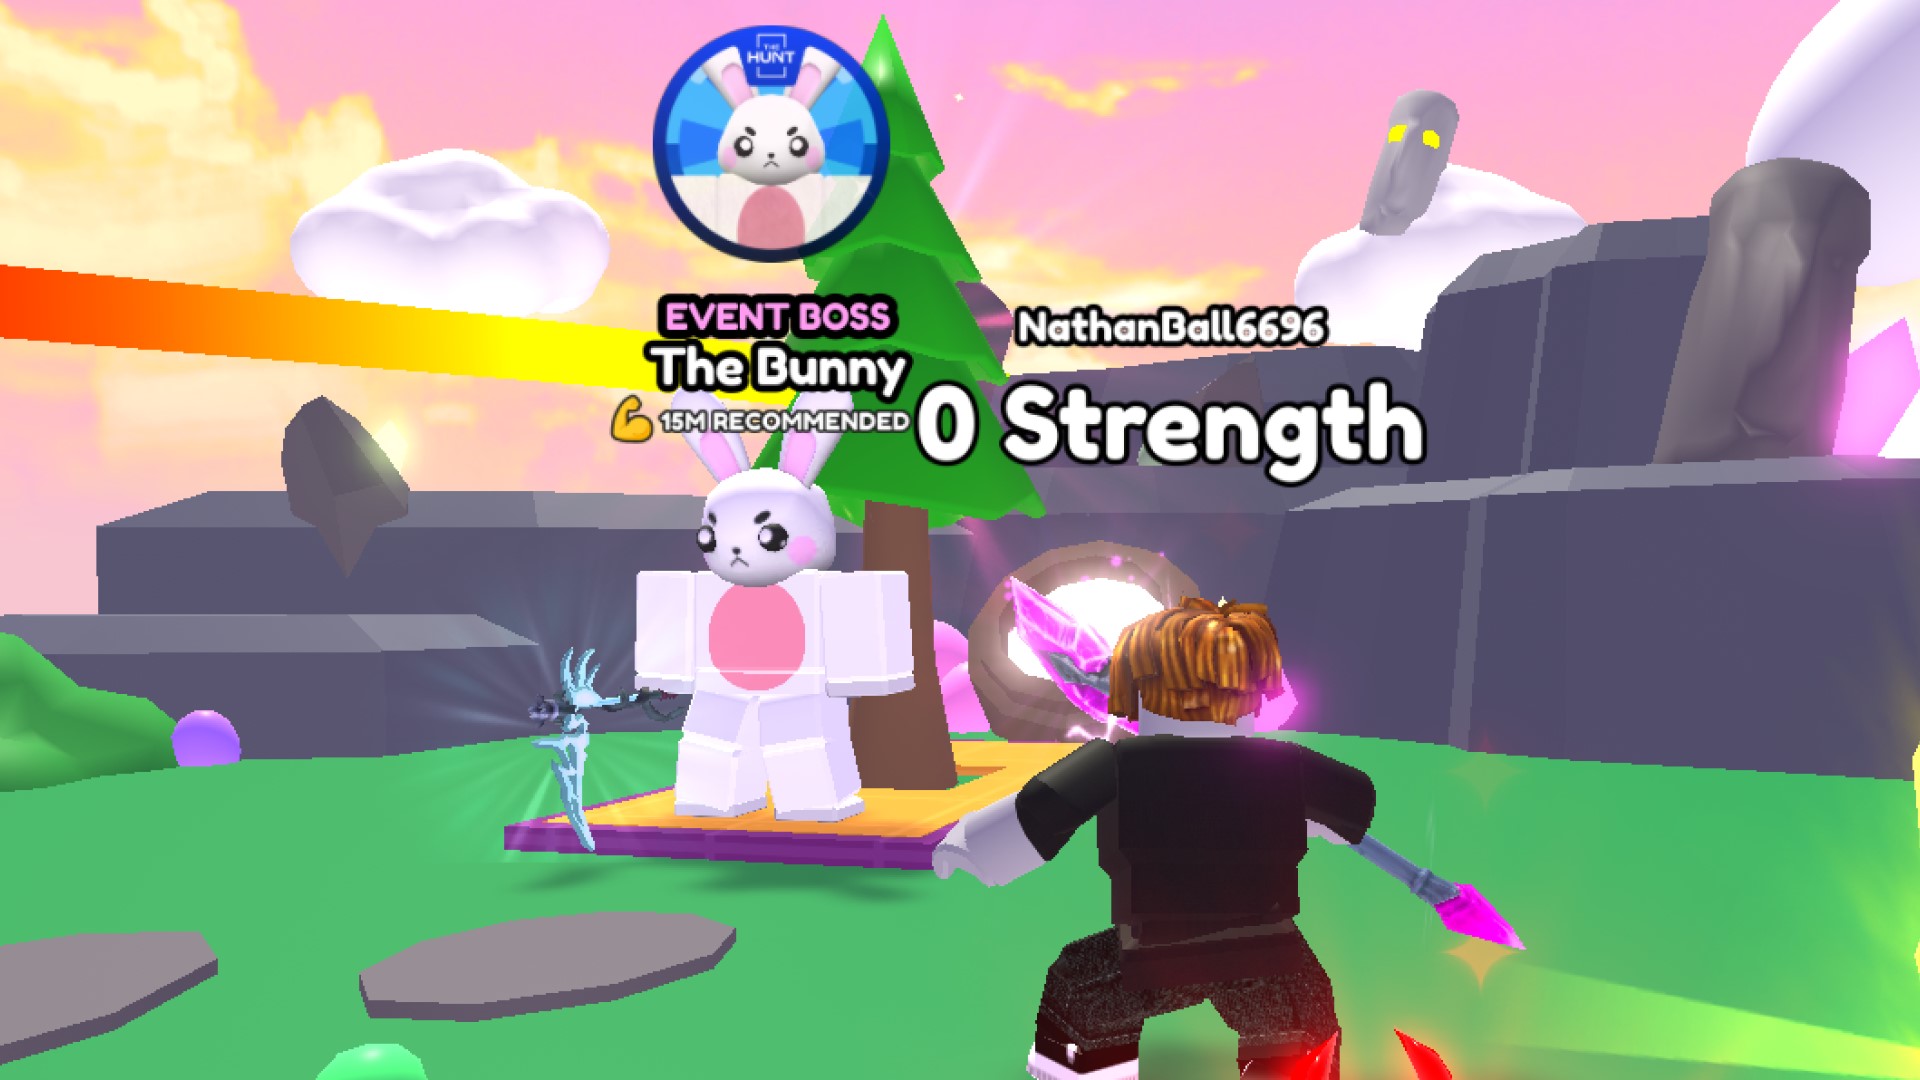 A character from Roblox game Lumberjack Simulator standing in front of The Bunny, a boss added during The Hunt event.